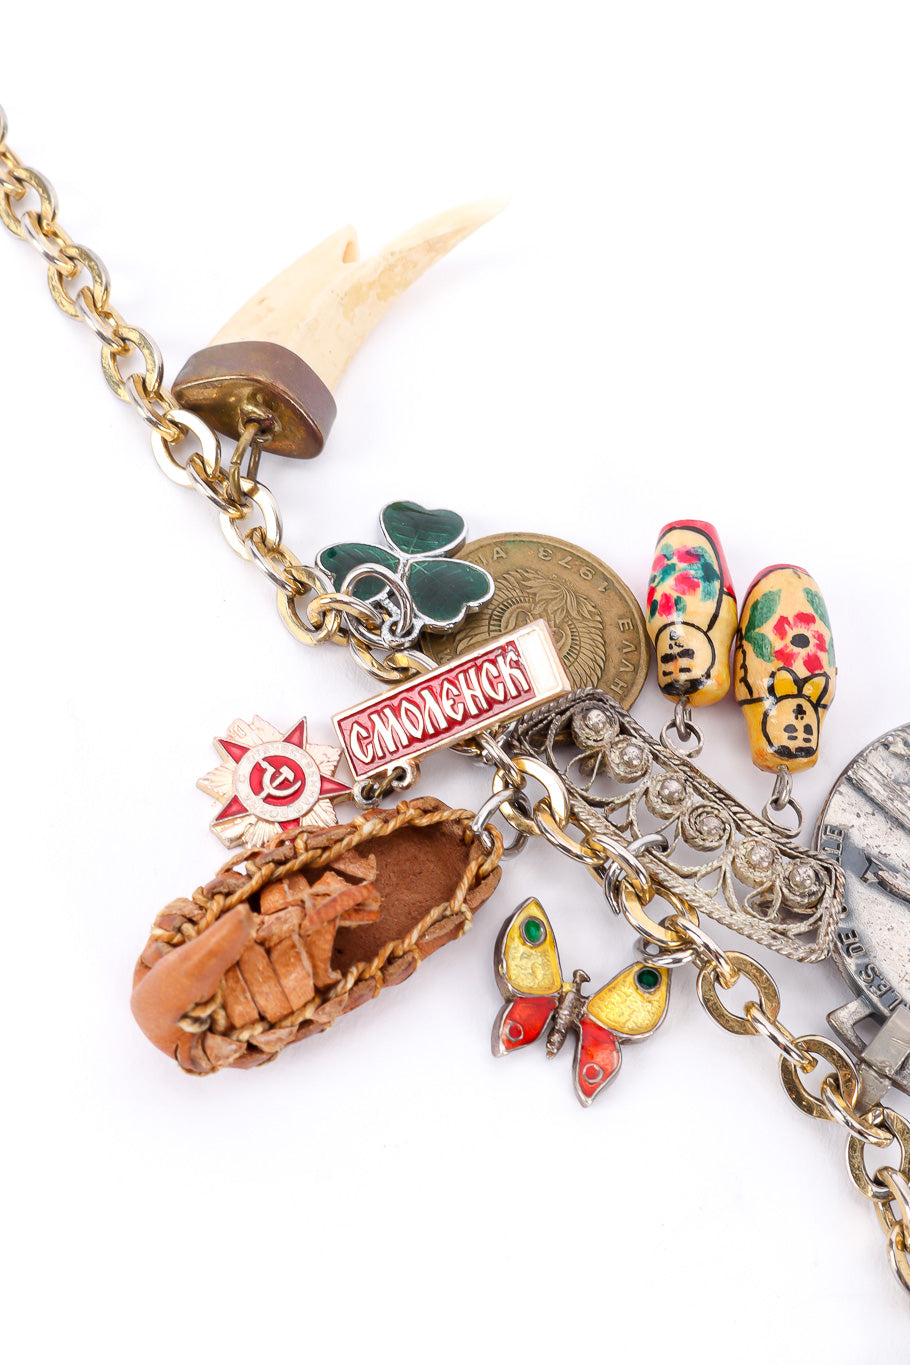 Charm necklace by Monet on white background leather shoe tooth and assorted charms @recessla